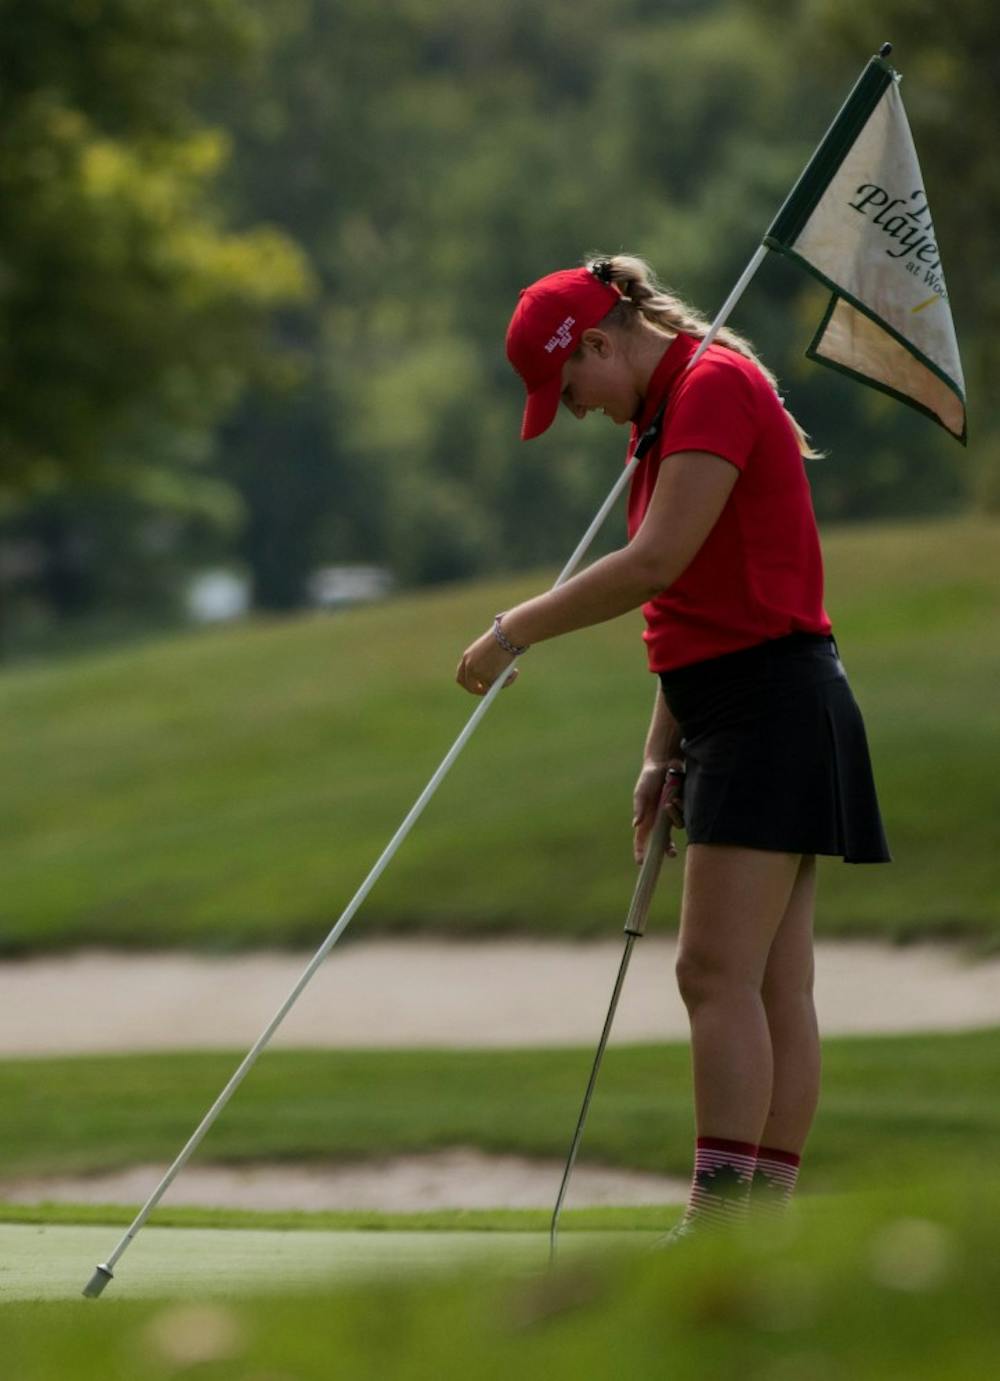 Freshman Dylann Armstrong holds the flag on the green as her opponents putt in their balls Sept. 17, 2018, at the Players Club in Yorktown, Indiana during the Cardinal Classic Golf Tournament. The Cardinals faced off against 16 other colleges in the two-day tournament. Eric Pritchett,DN